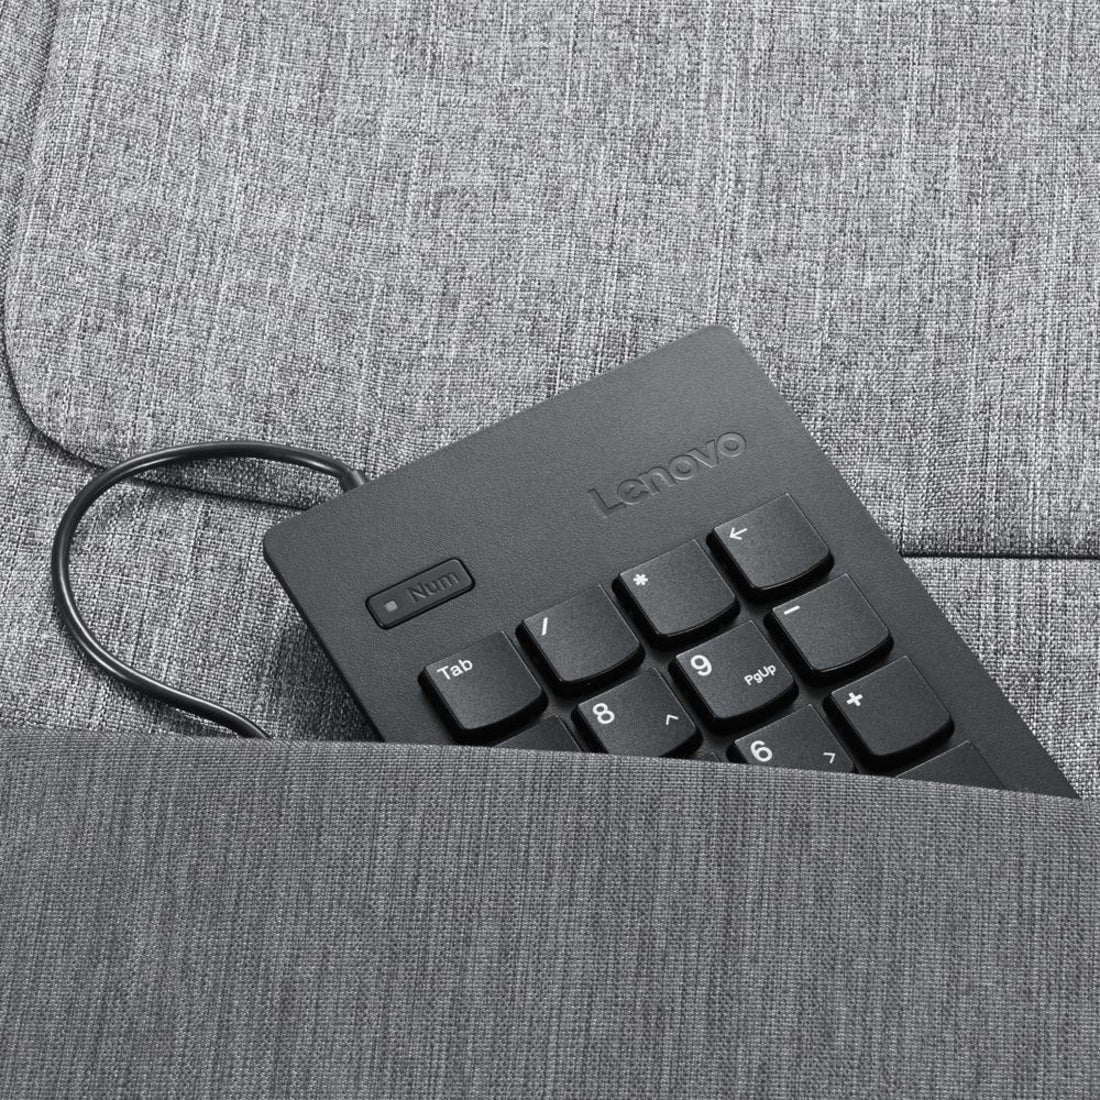 Lenovo 4Y40R38905 USB Numeric Keypad Gen II, Compact and Convenient Keypad for Tablet and Notebook